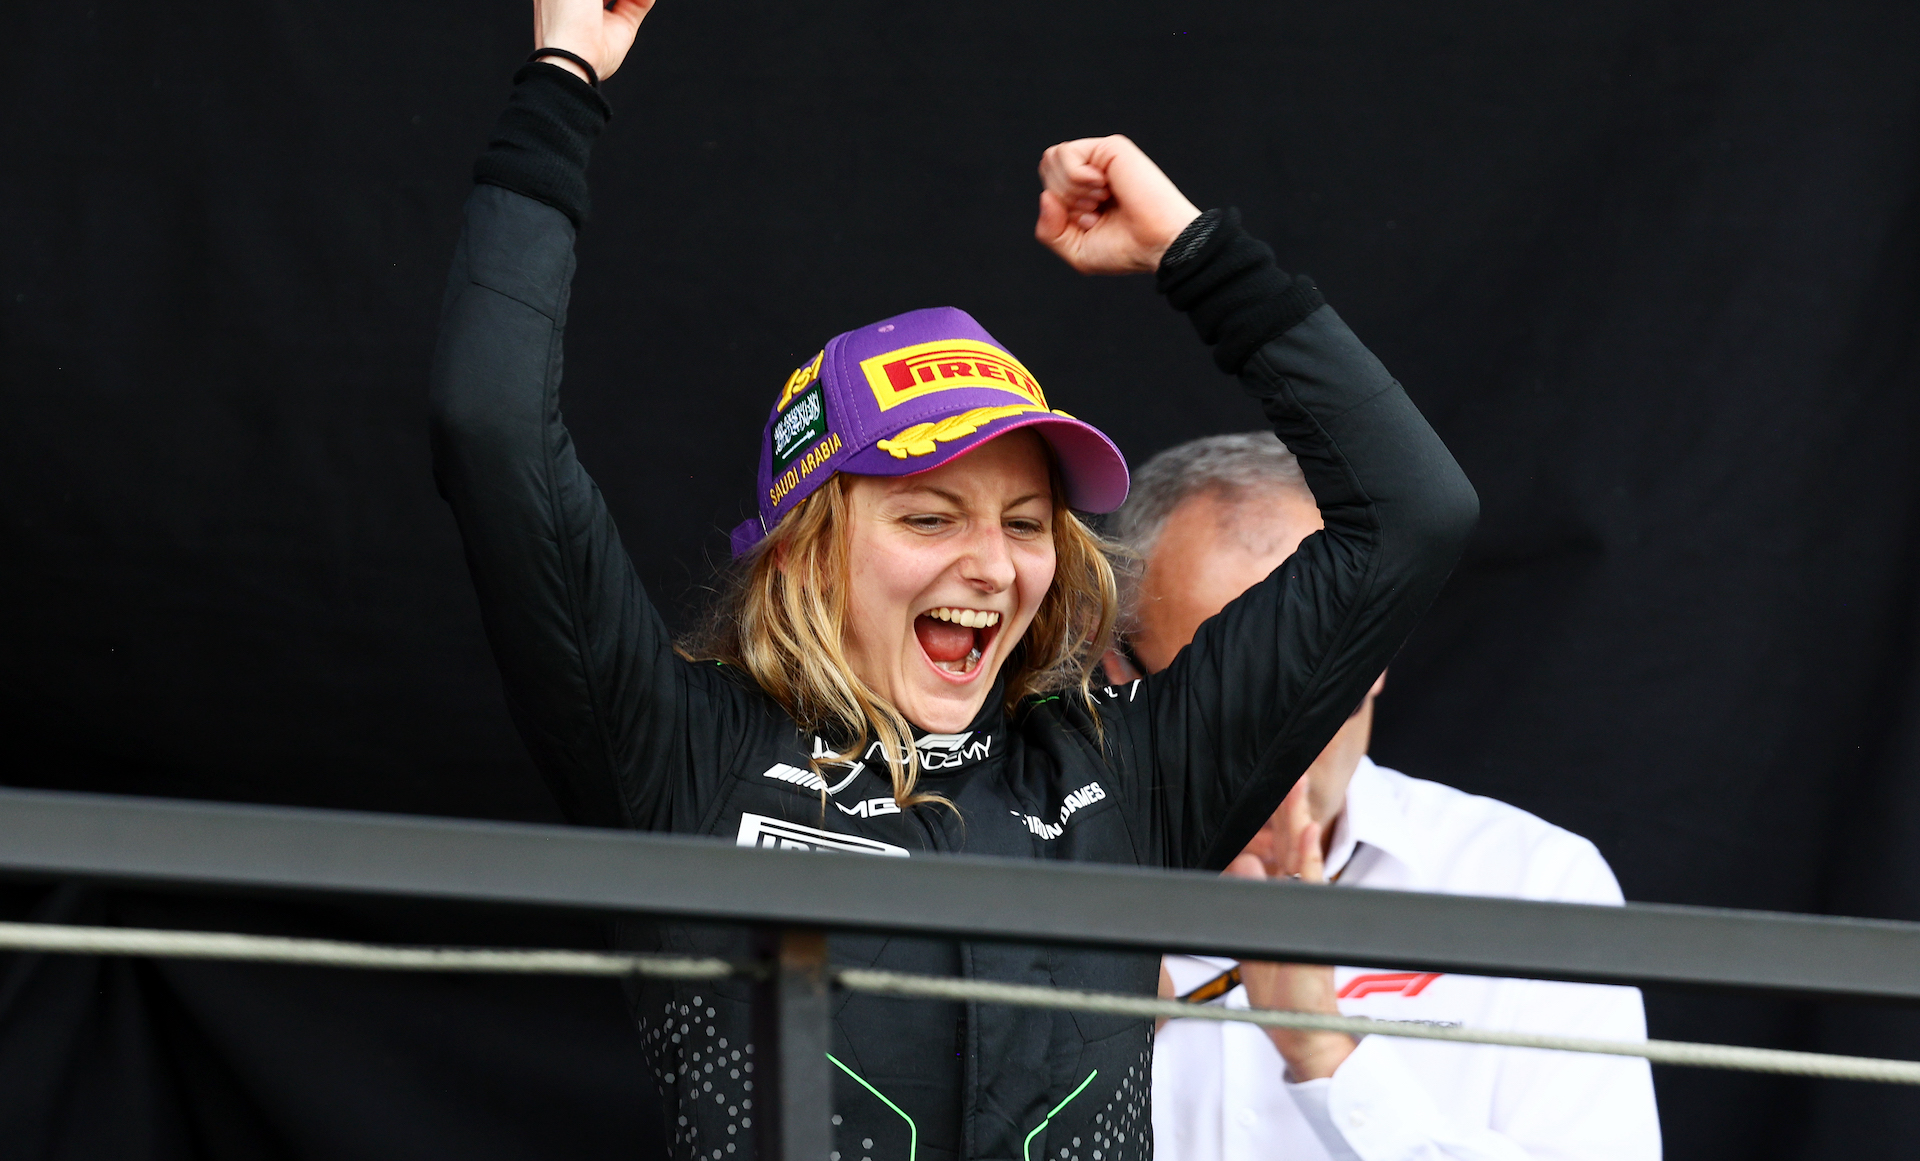 Race winner Doriane Pin of France and PREMA Racing (28) celebrates on the podium during Round 1 Jeddah race 2 of the F1 Academy at Jeddah Corniche Circuit.